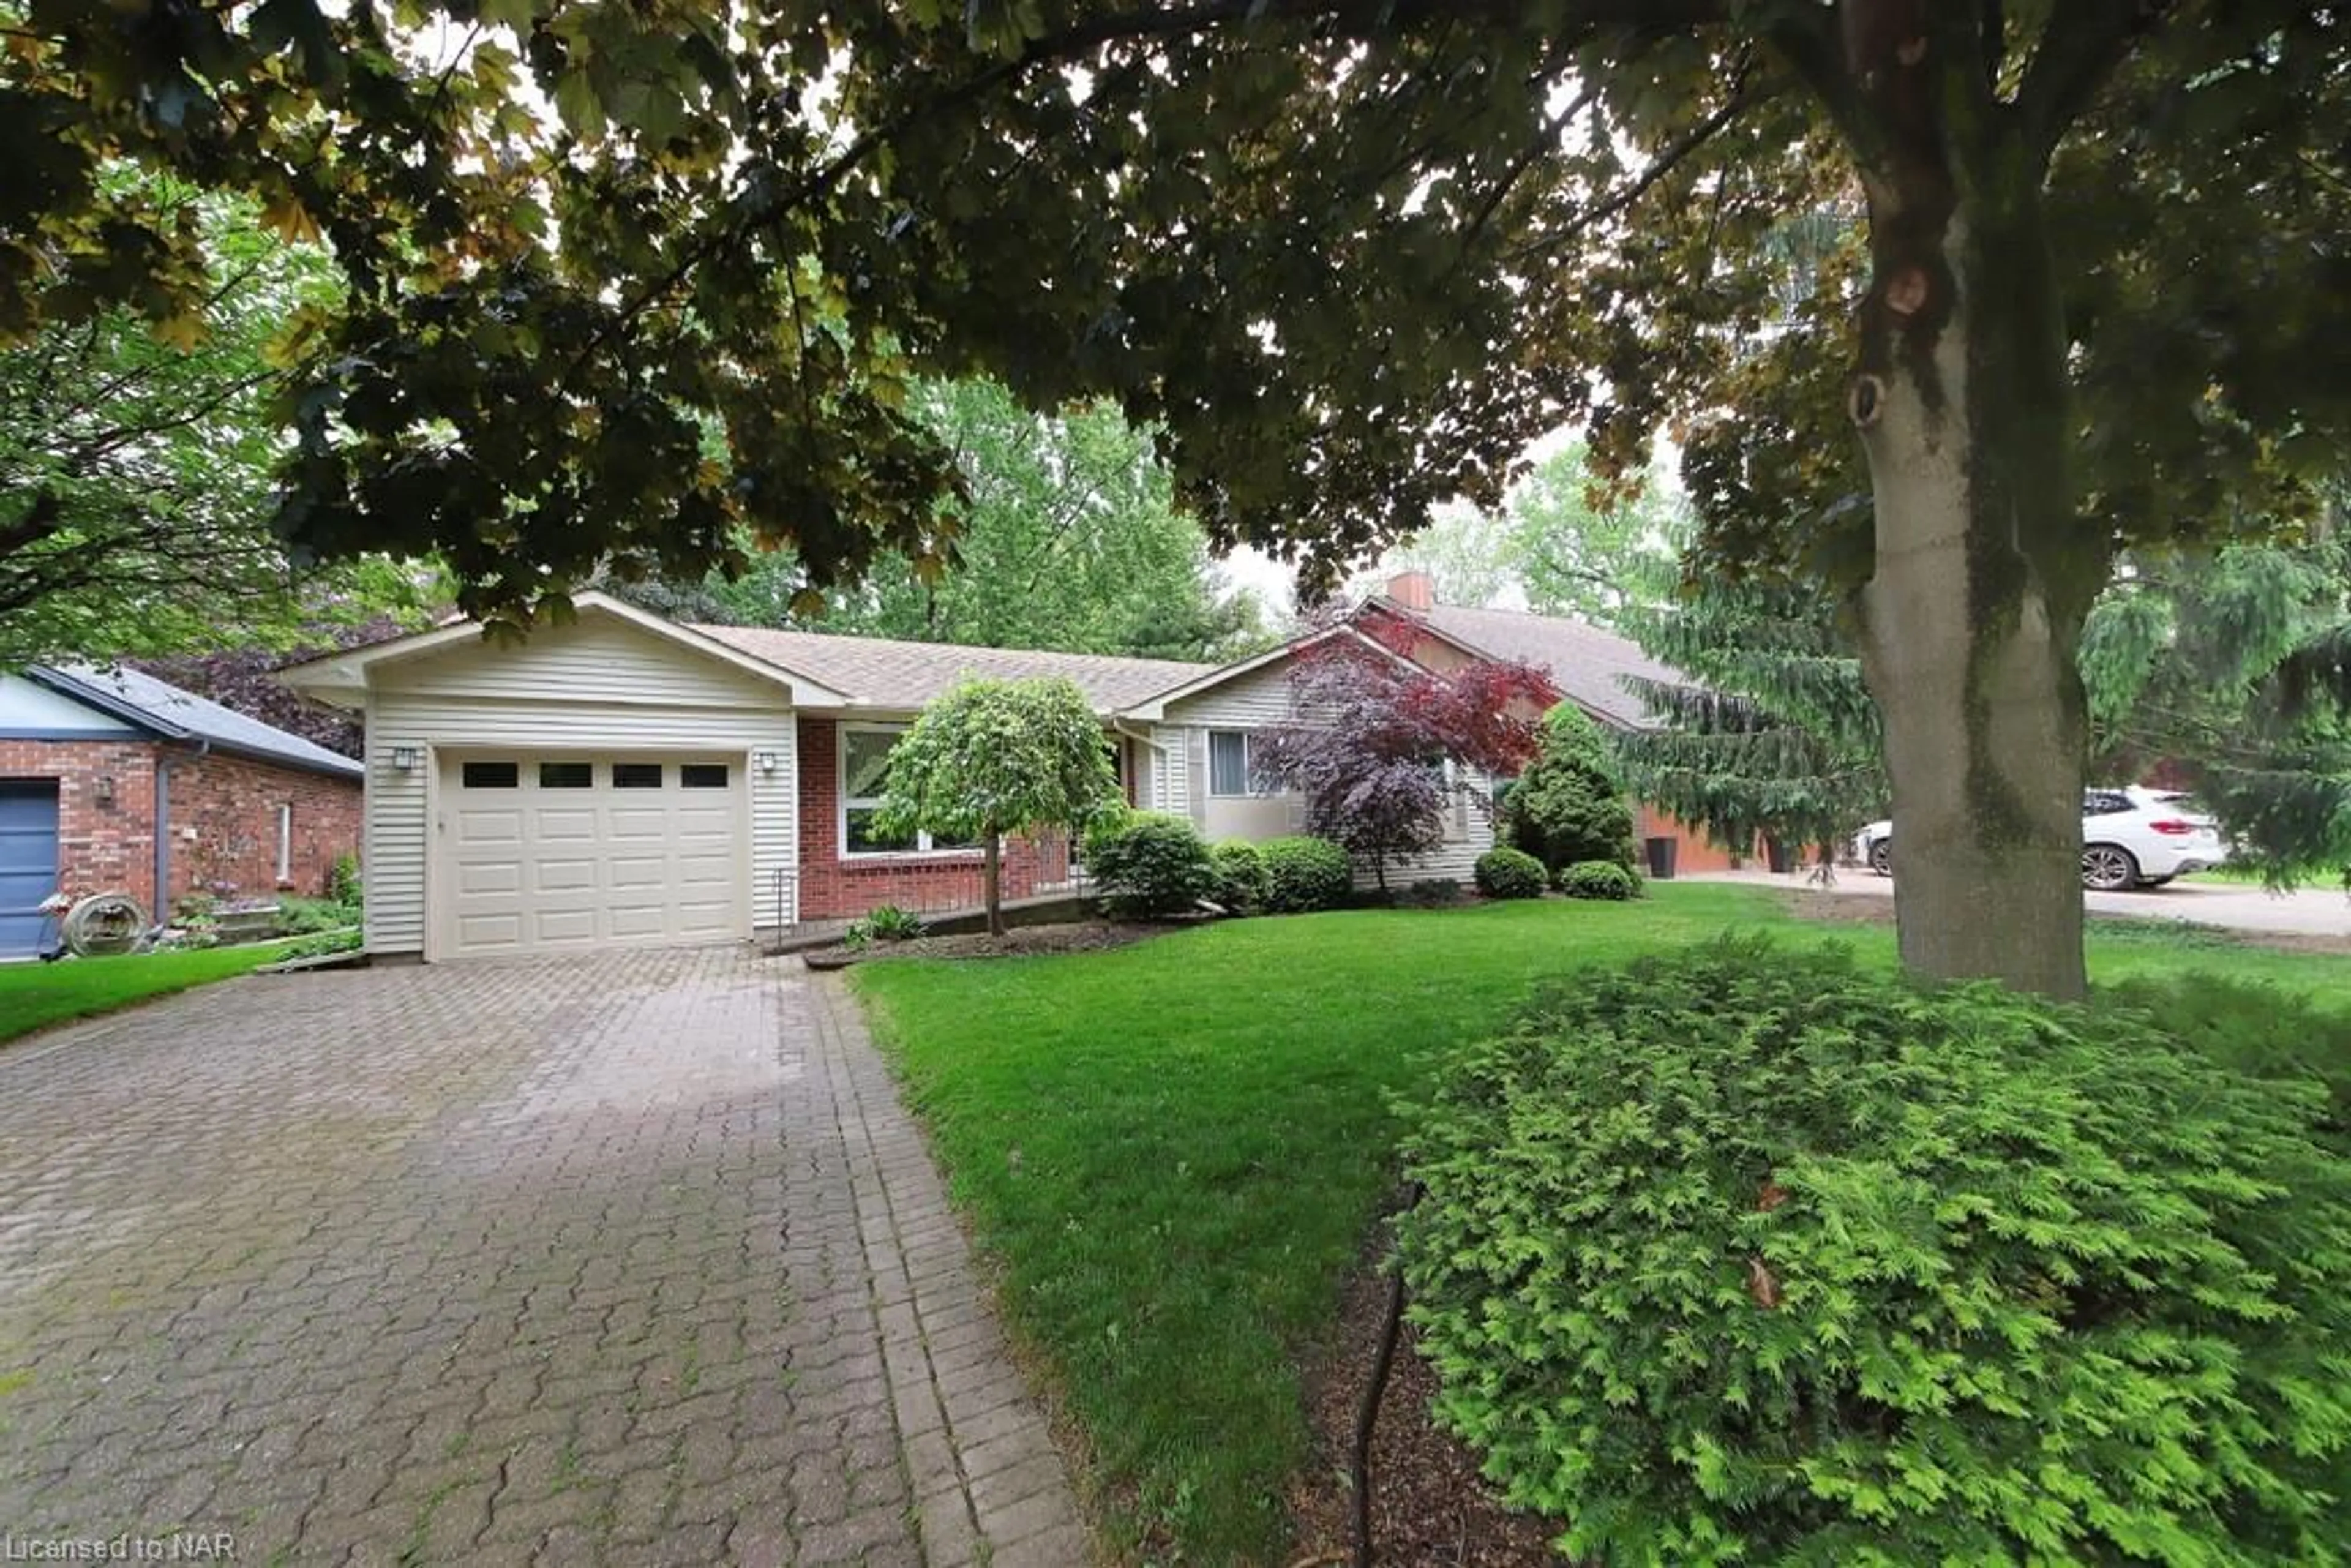 Outside view for 15 Oak Dr, Niagara-on-the-Lake Ontario L0S 1J0